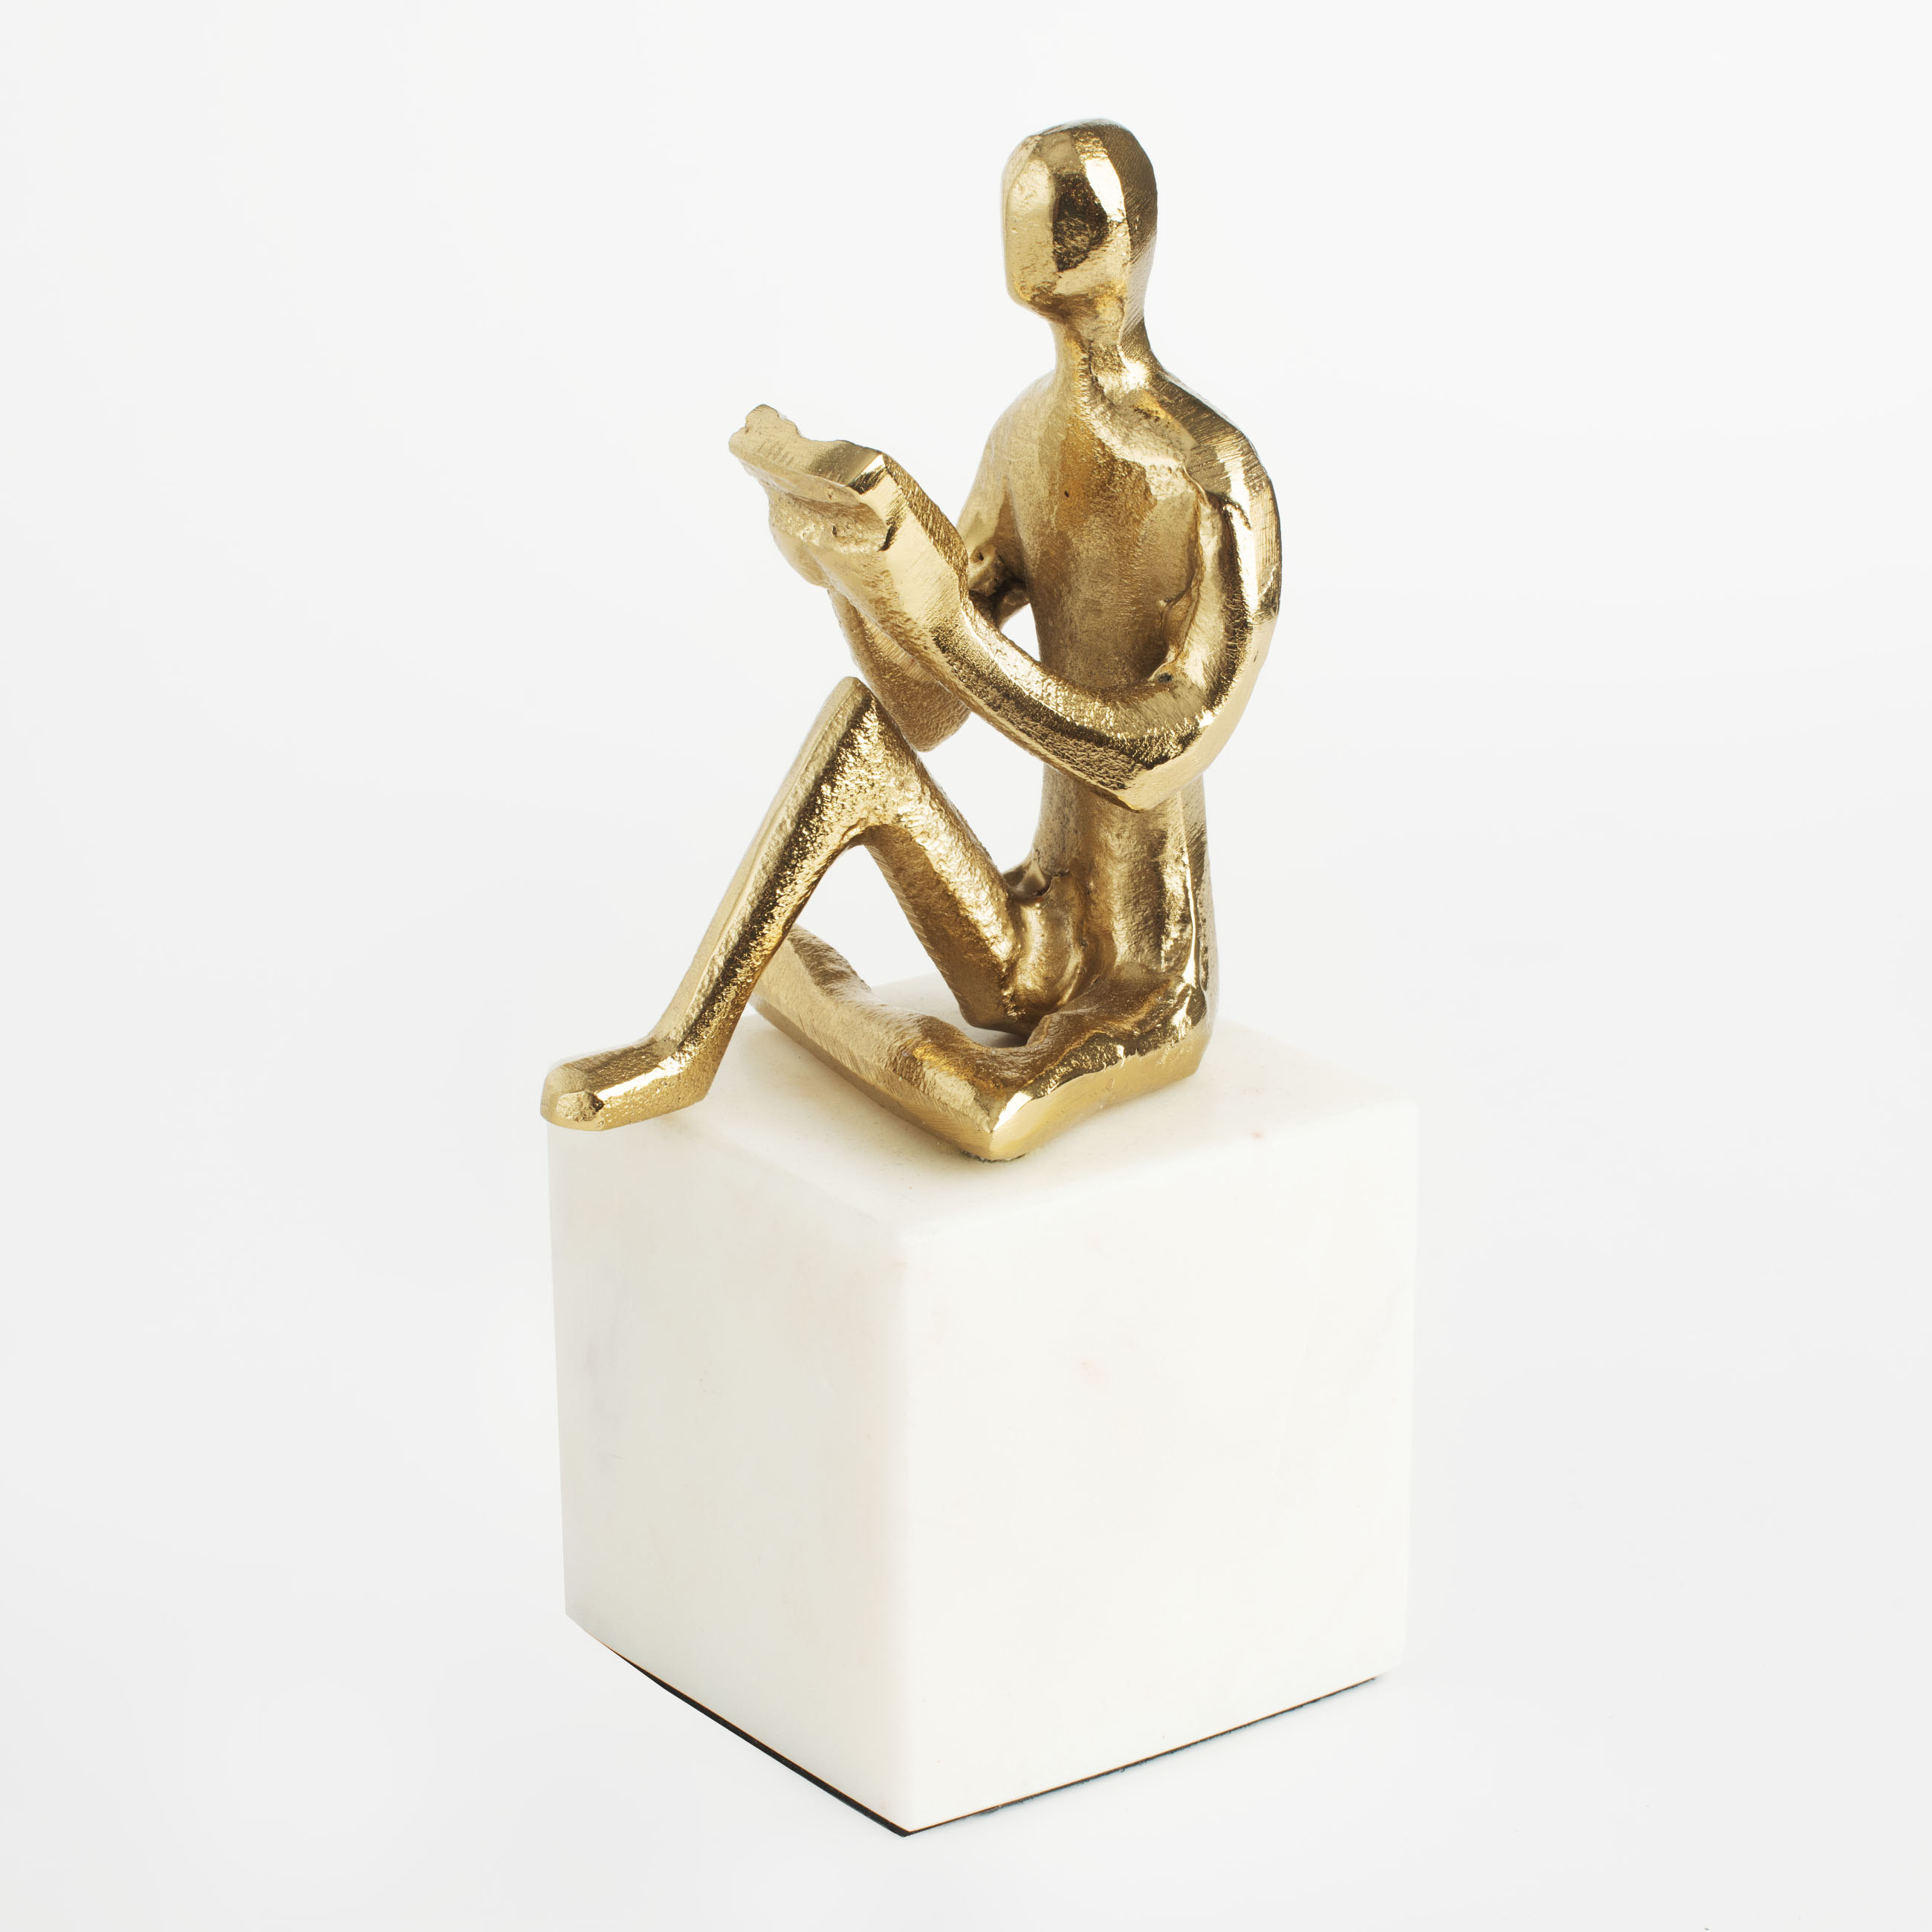 Statuette, 19 cm, metal / marble, golden, Man with a book, Think изображение № 2